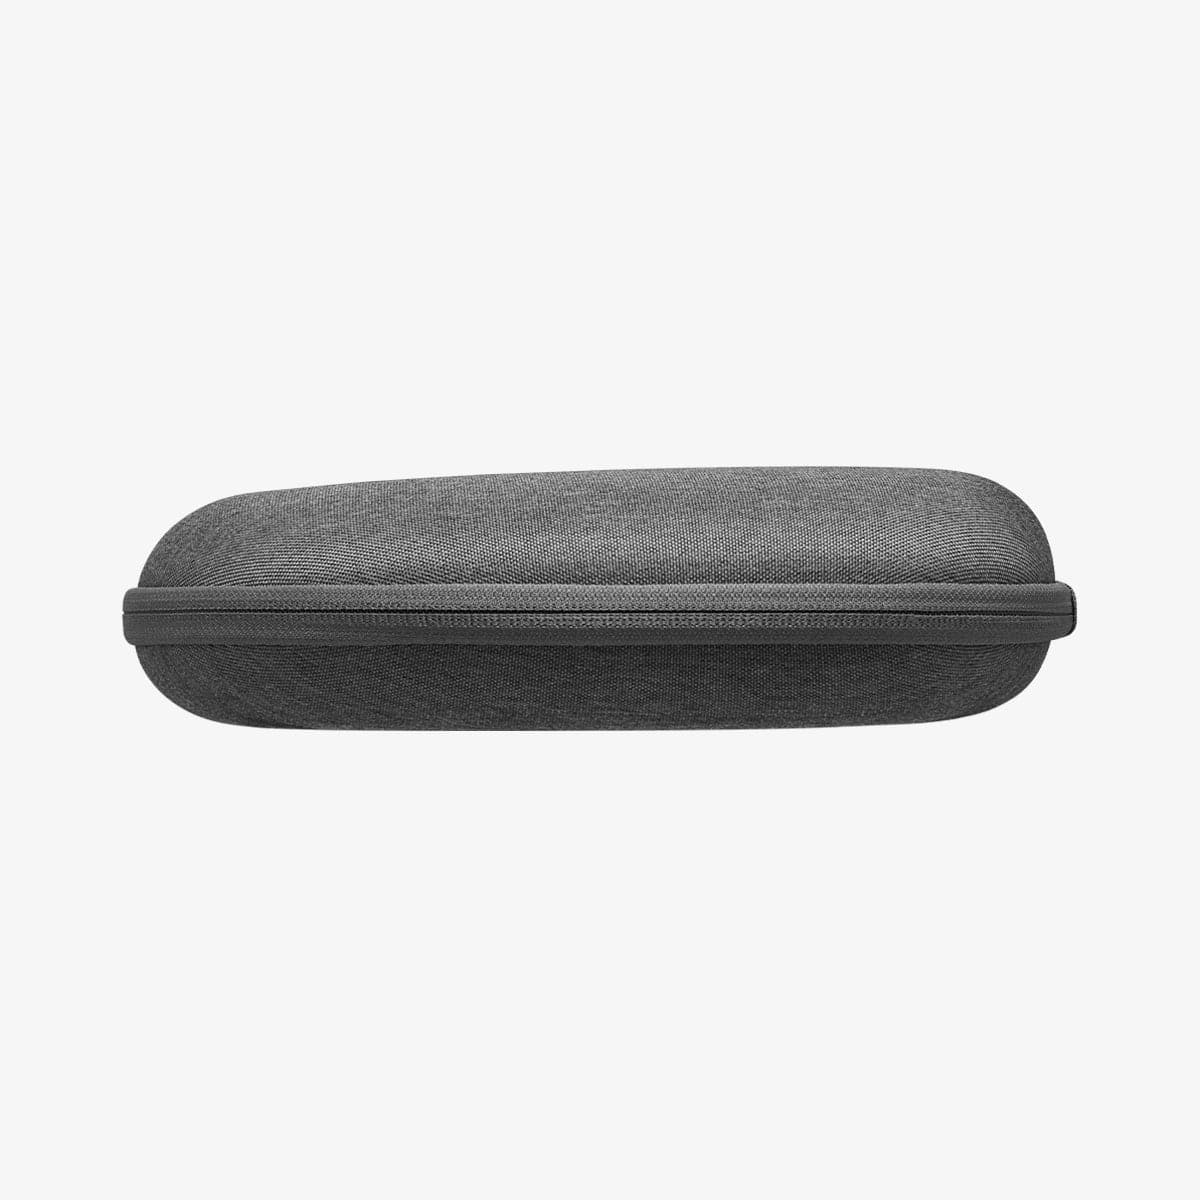 AFA02996 - Airpods Max Klasden Pouch in charcoal gray showing the side